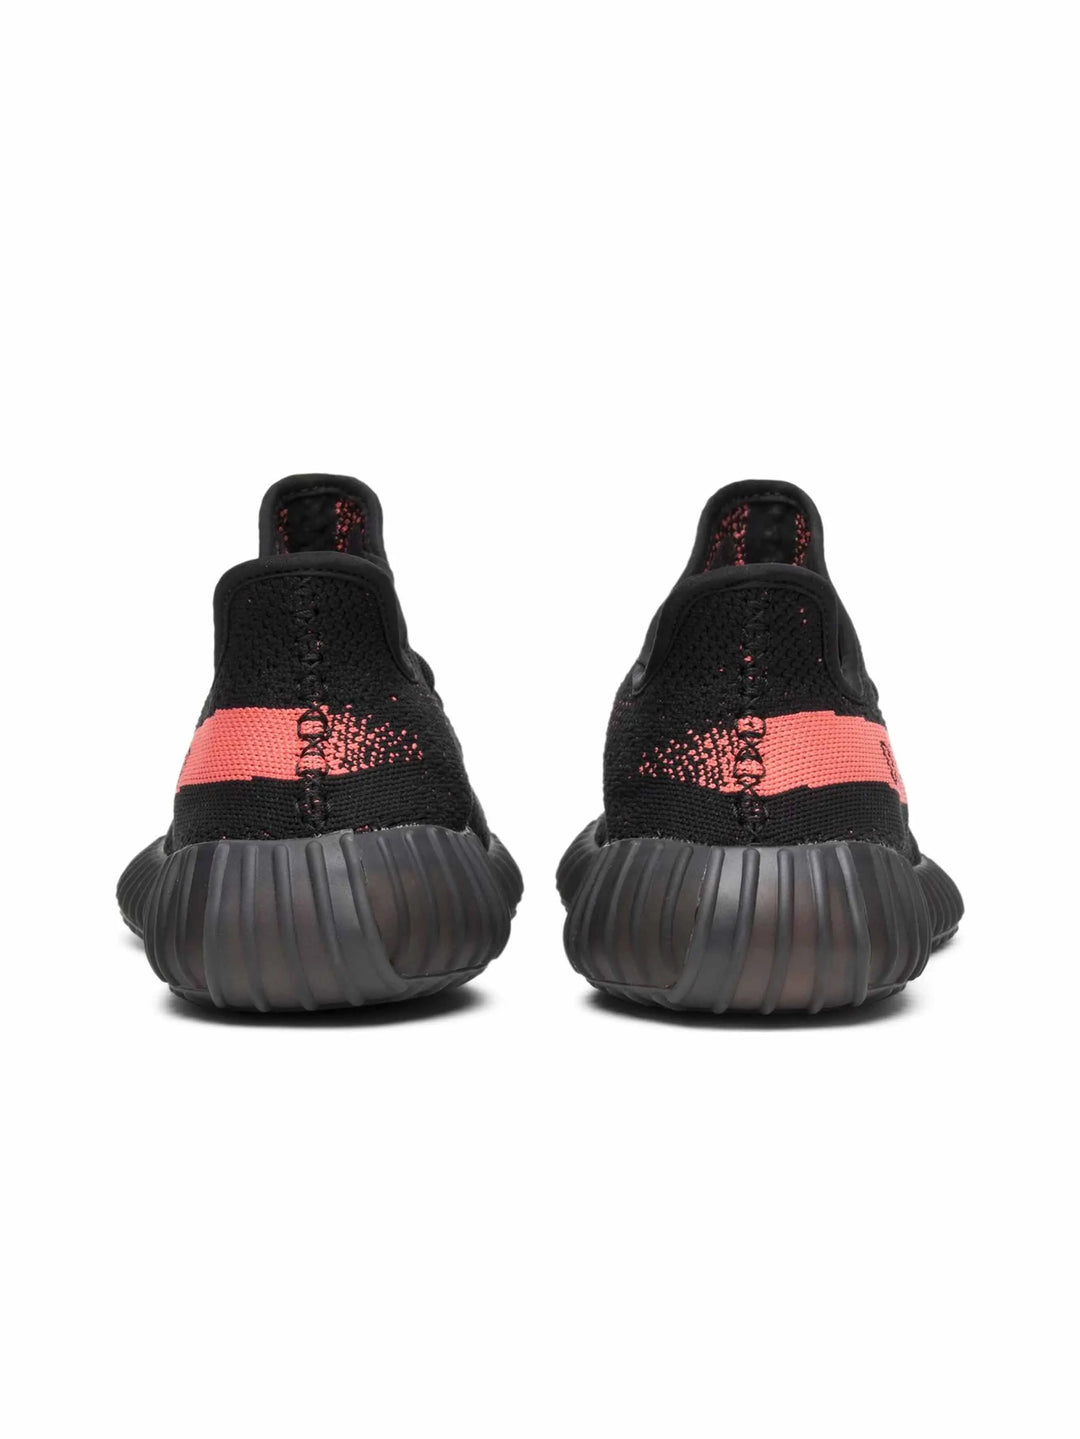 adidas Yeezy Boost 350 V2 Core Black/Red (2022) Prior